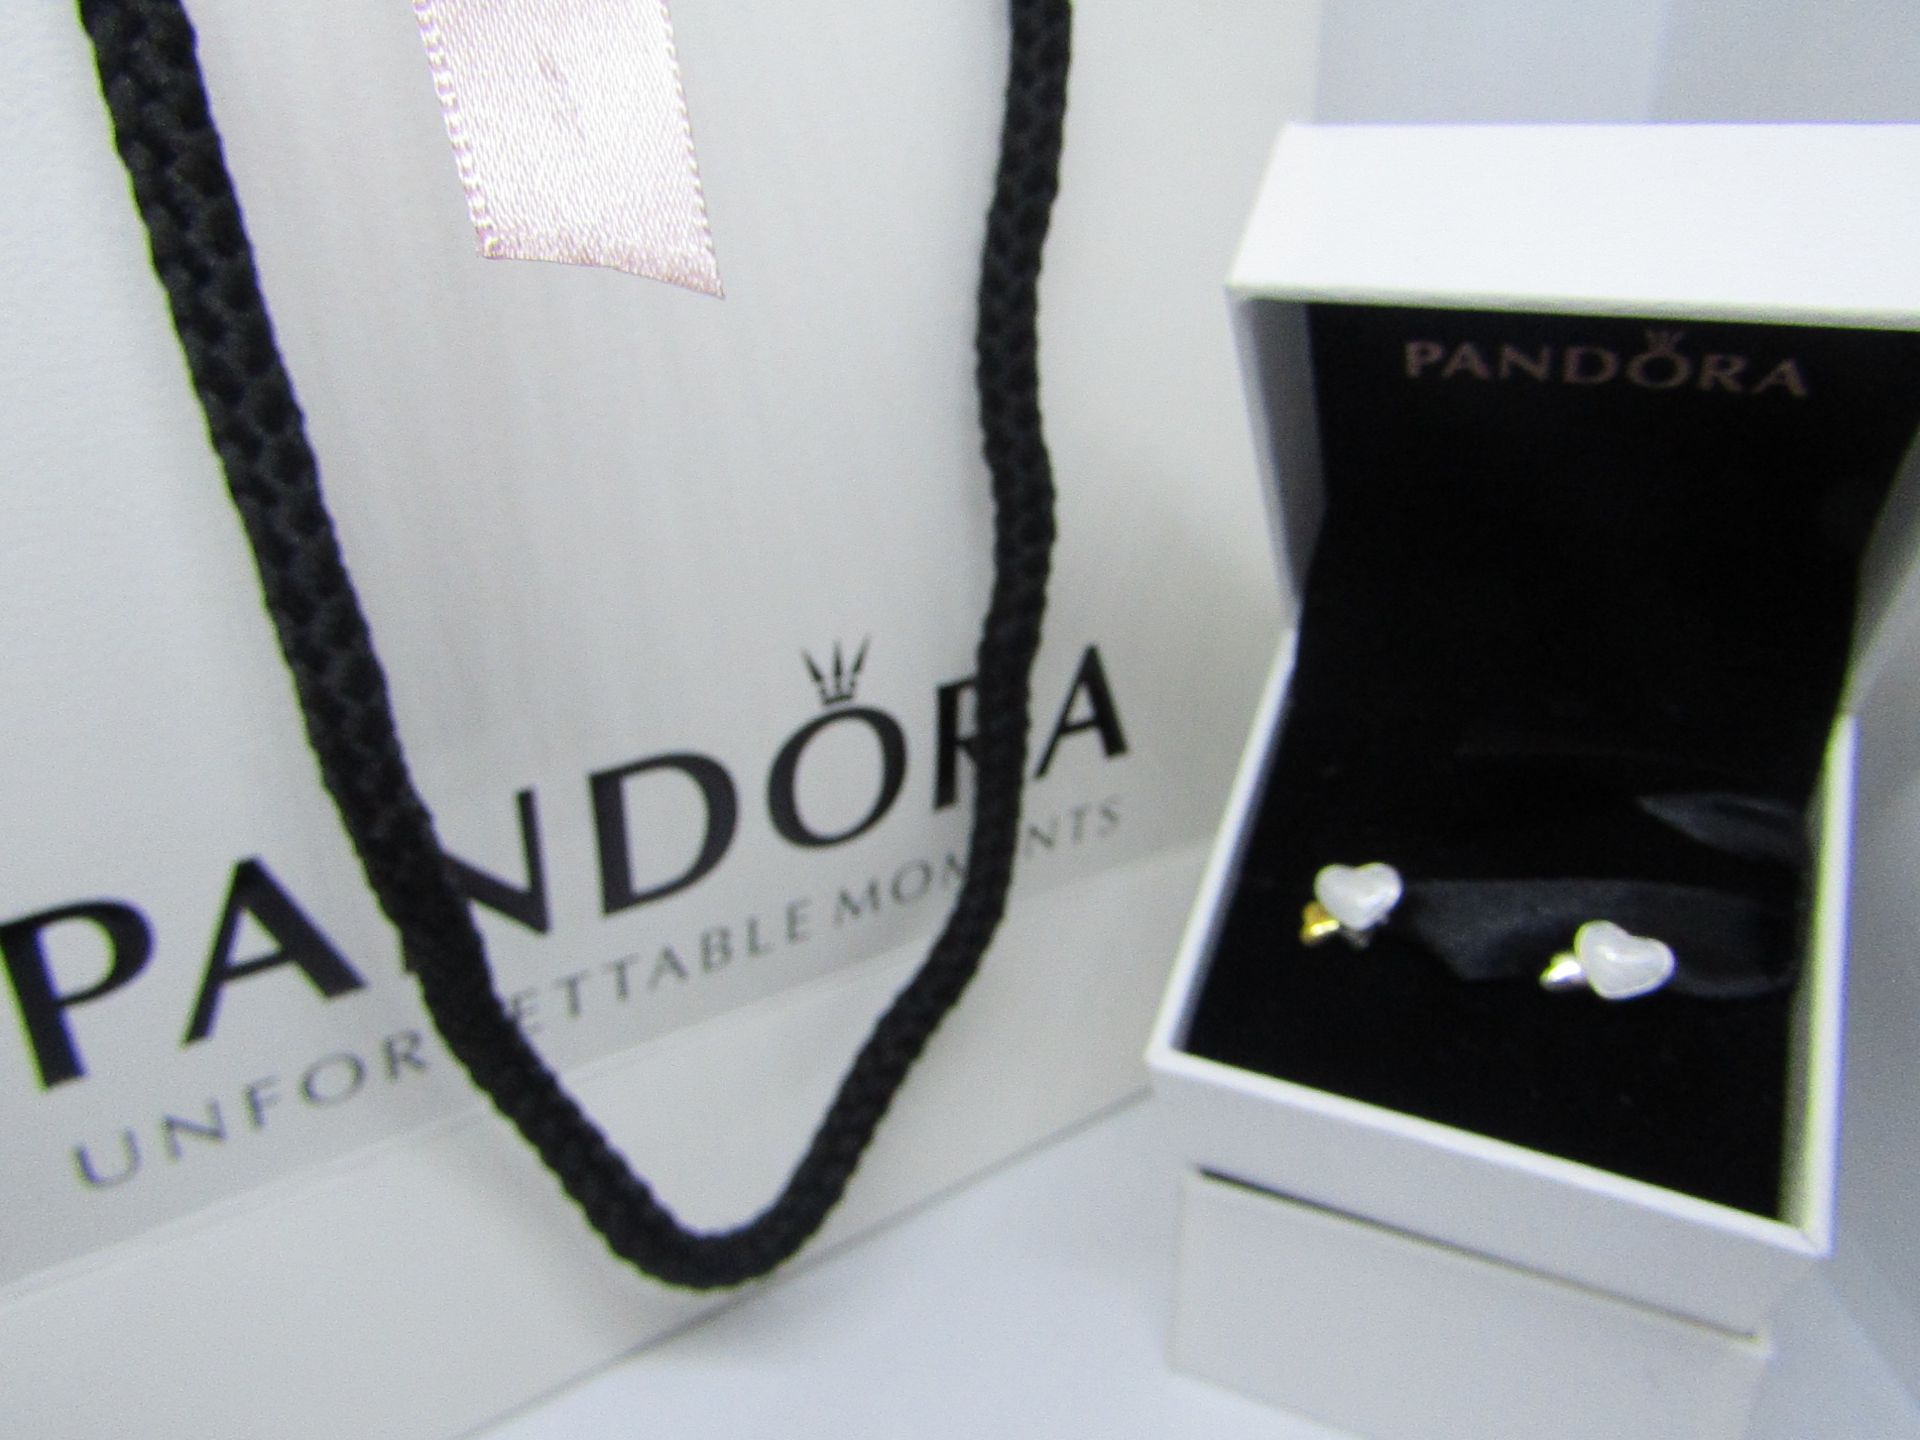 Pandora 925 Silver Heart Earrings in Presentation box & Pandora Gift Bag (ideal Mothers Day Gift)